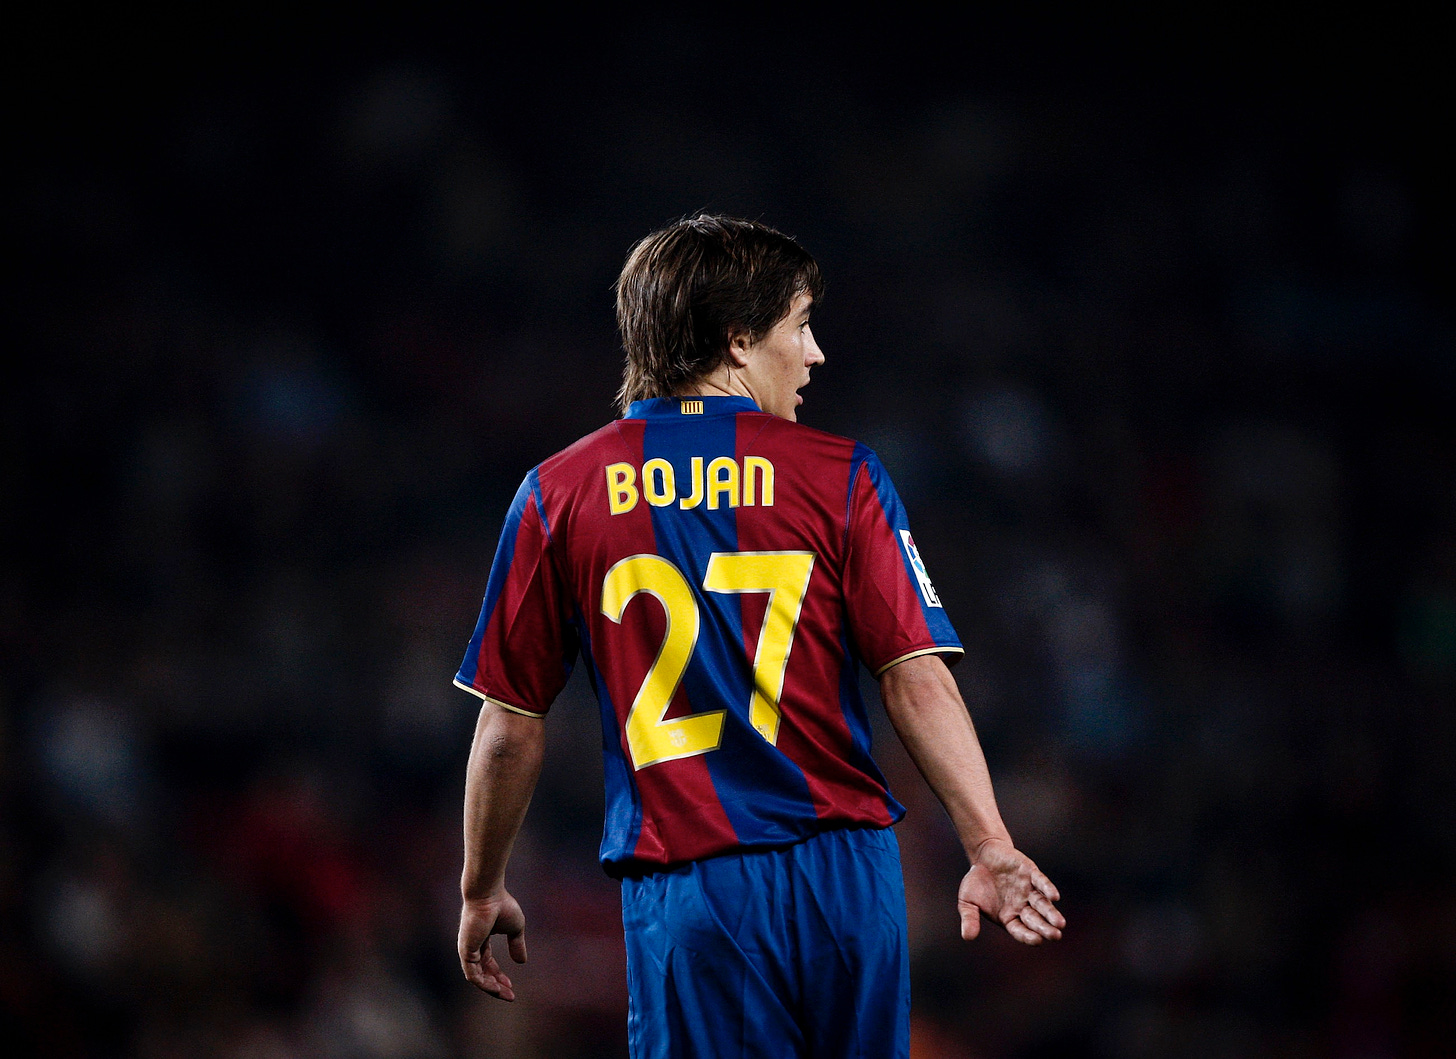 What went wrong for Bojan, once dubbed the future of Barcelona, at  football's summit?